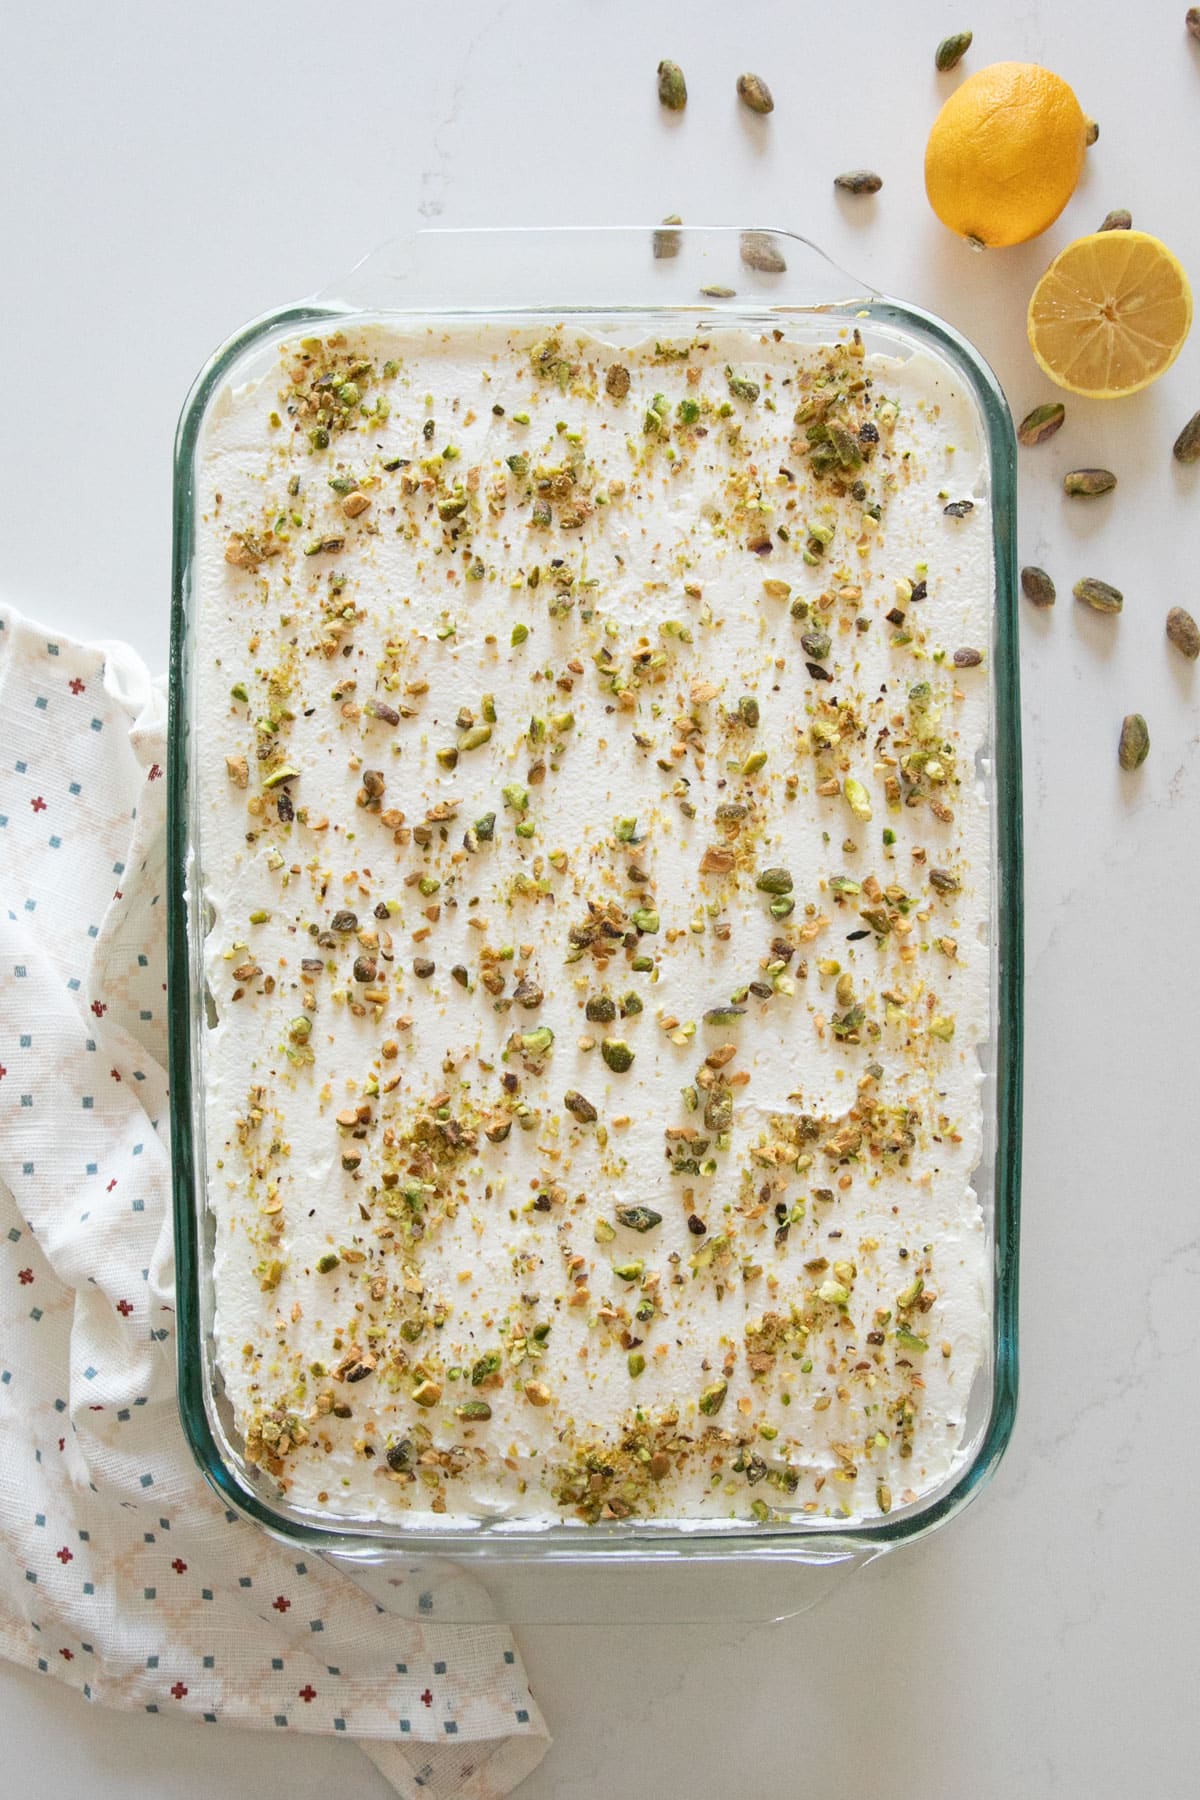 An overhead image ofa pistachio cake with whipped cream and sprinkled with pistachios in a rectangular glass pan with a white towel, pistachio nuts and lemons on the sides of it.